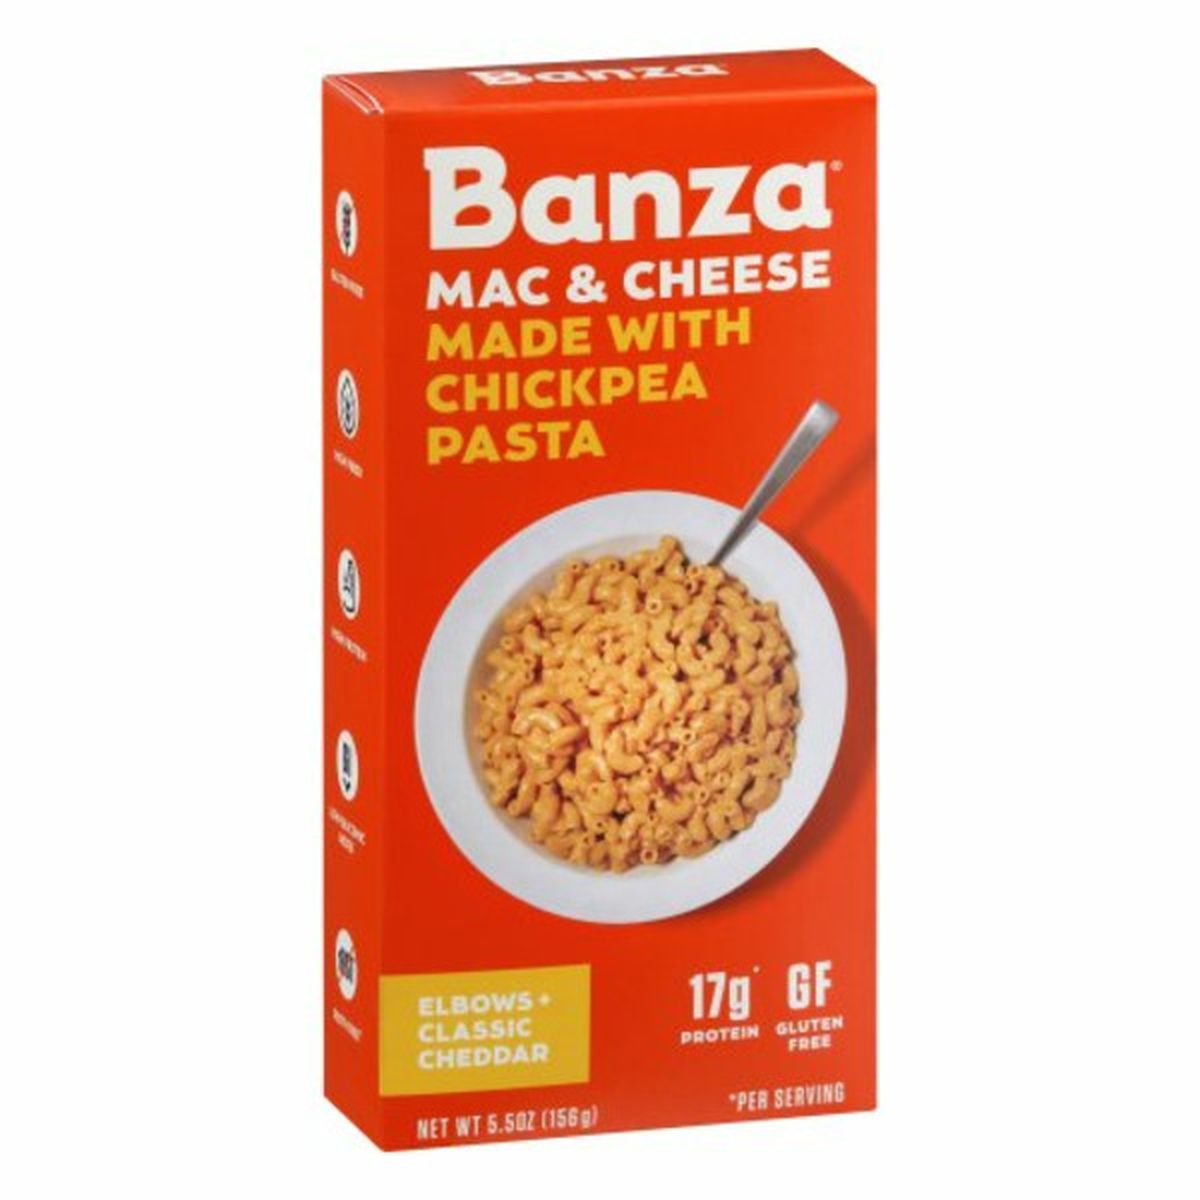 Calories in Banza Mac & Cheese, Made with Chickpea Pasta